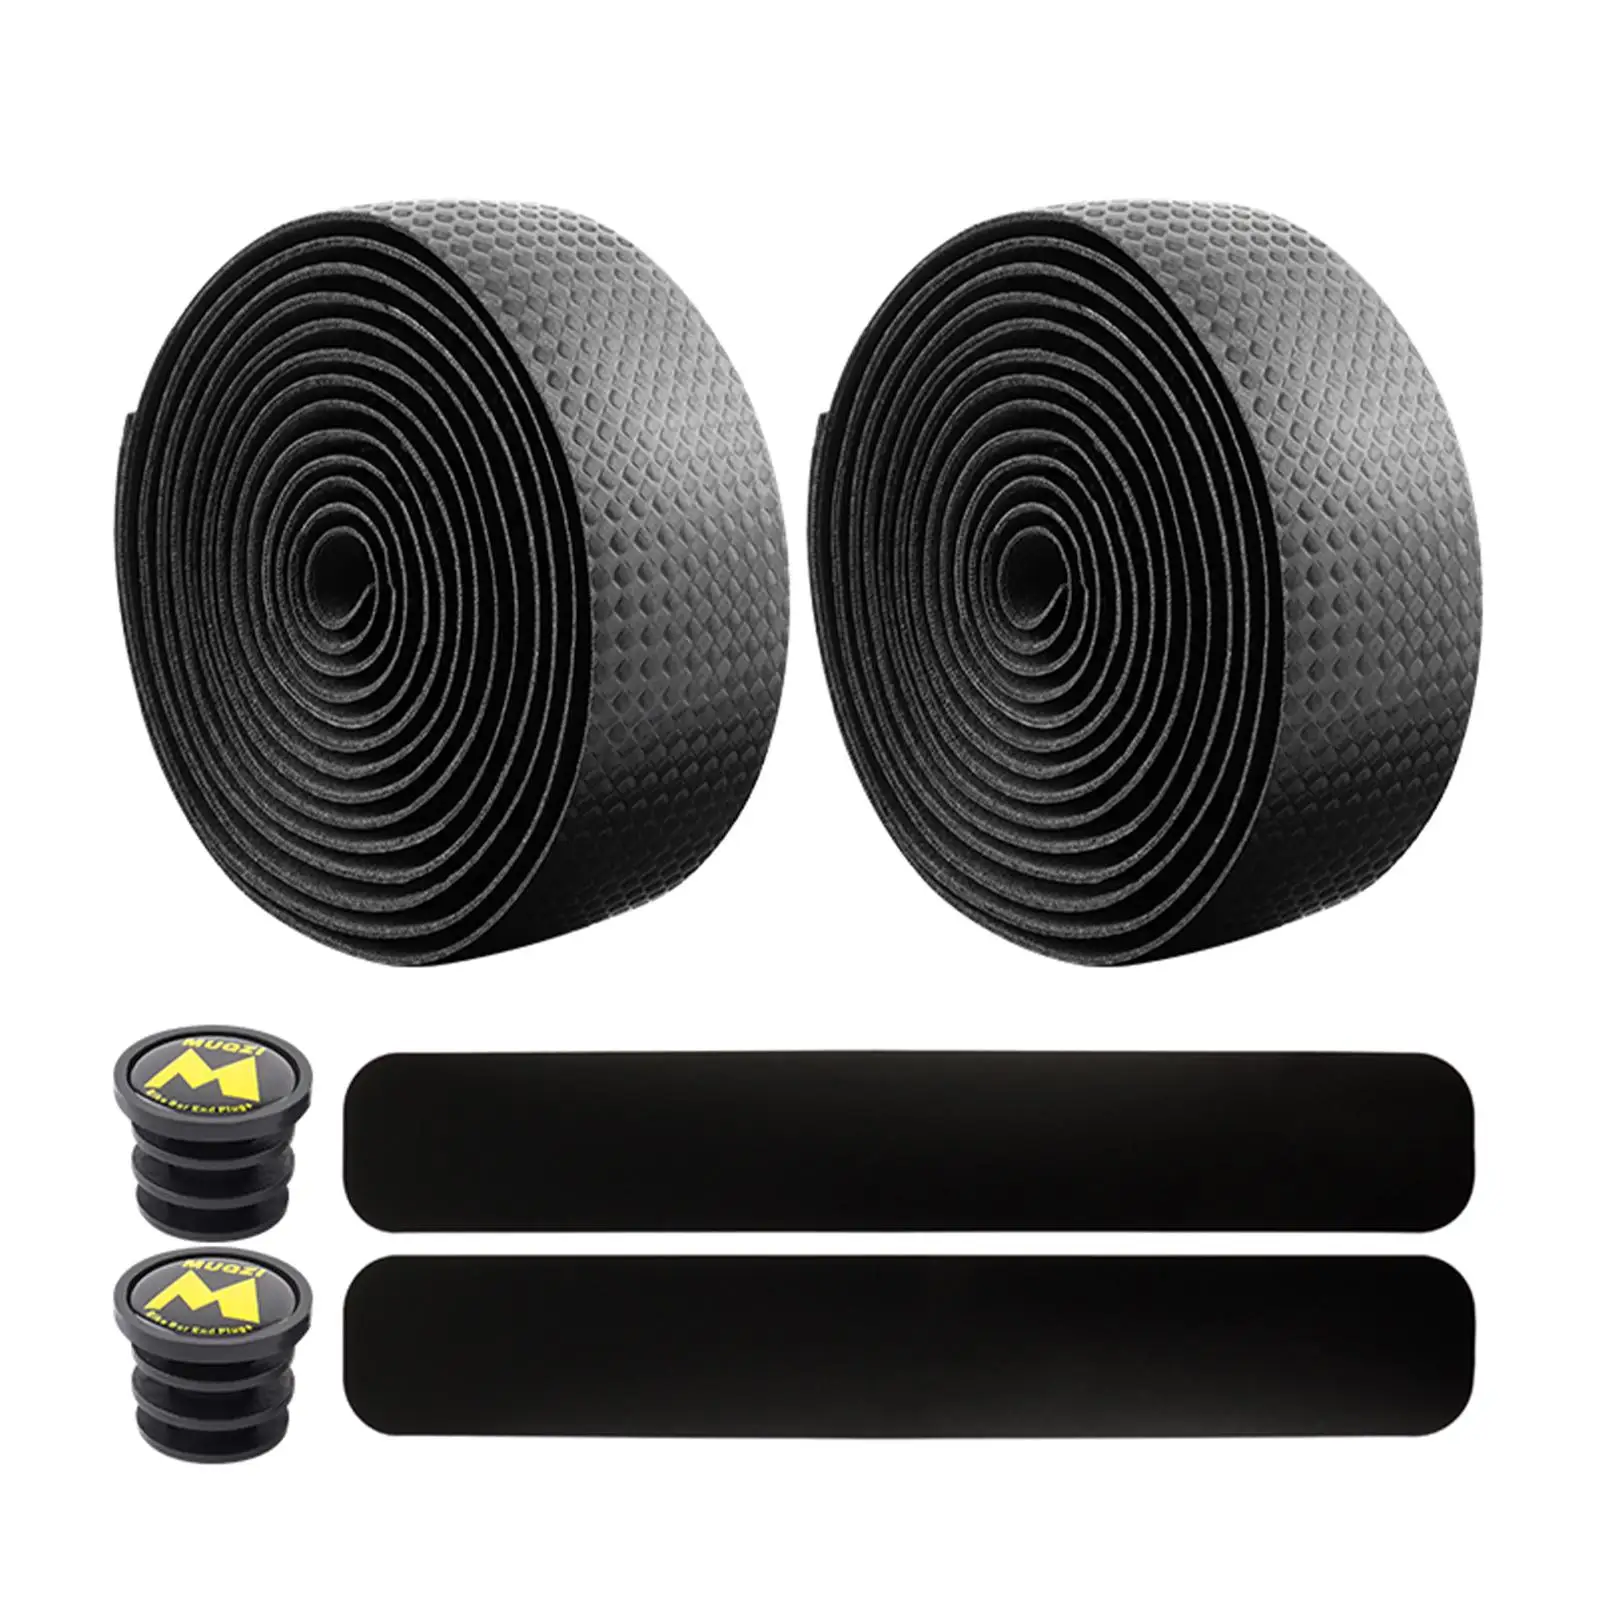 Bike Handlebar Tapes Handle Bar Wraps Mountain Bar Tape with End for Road Bikes